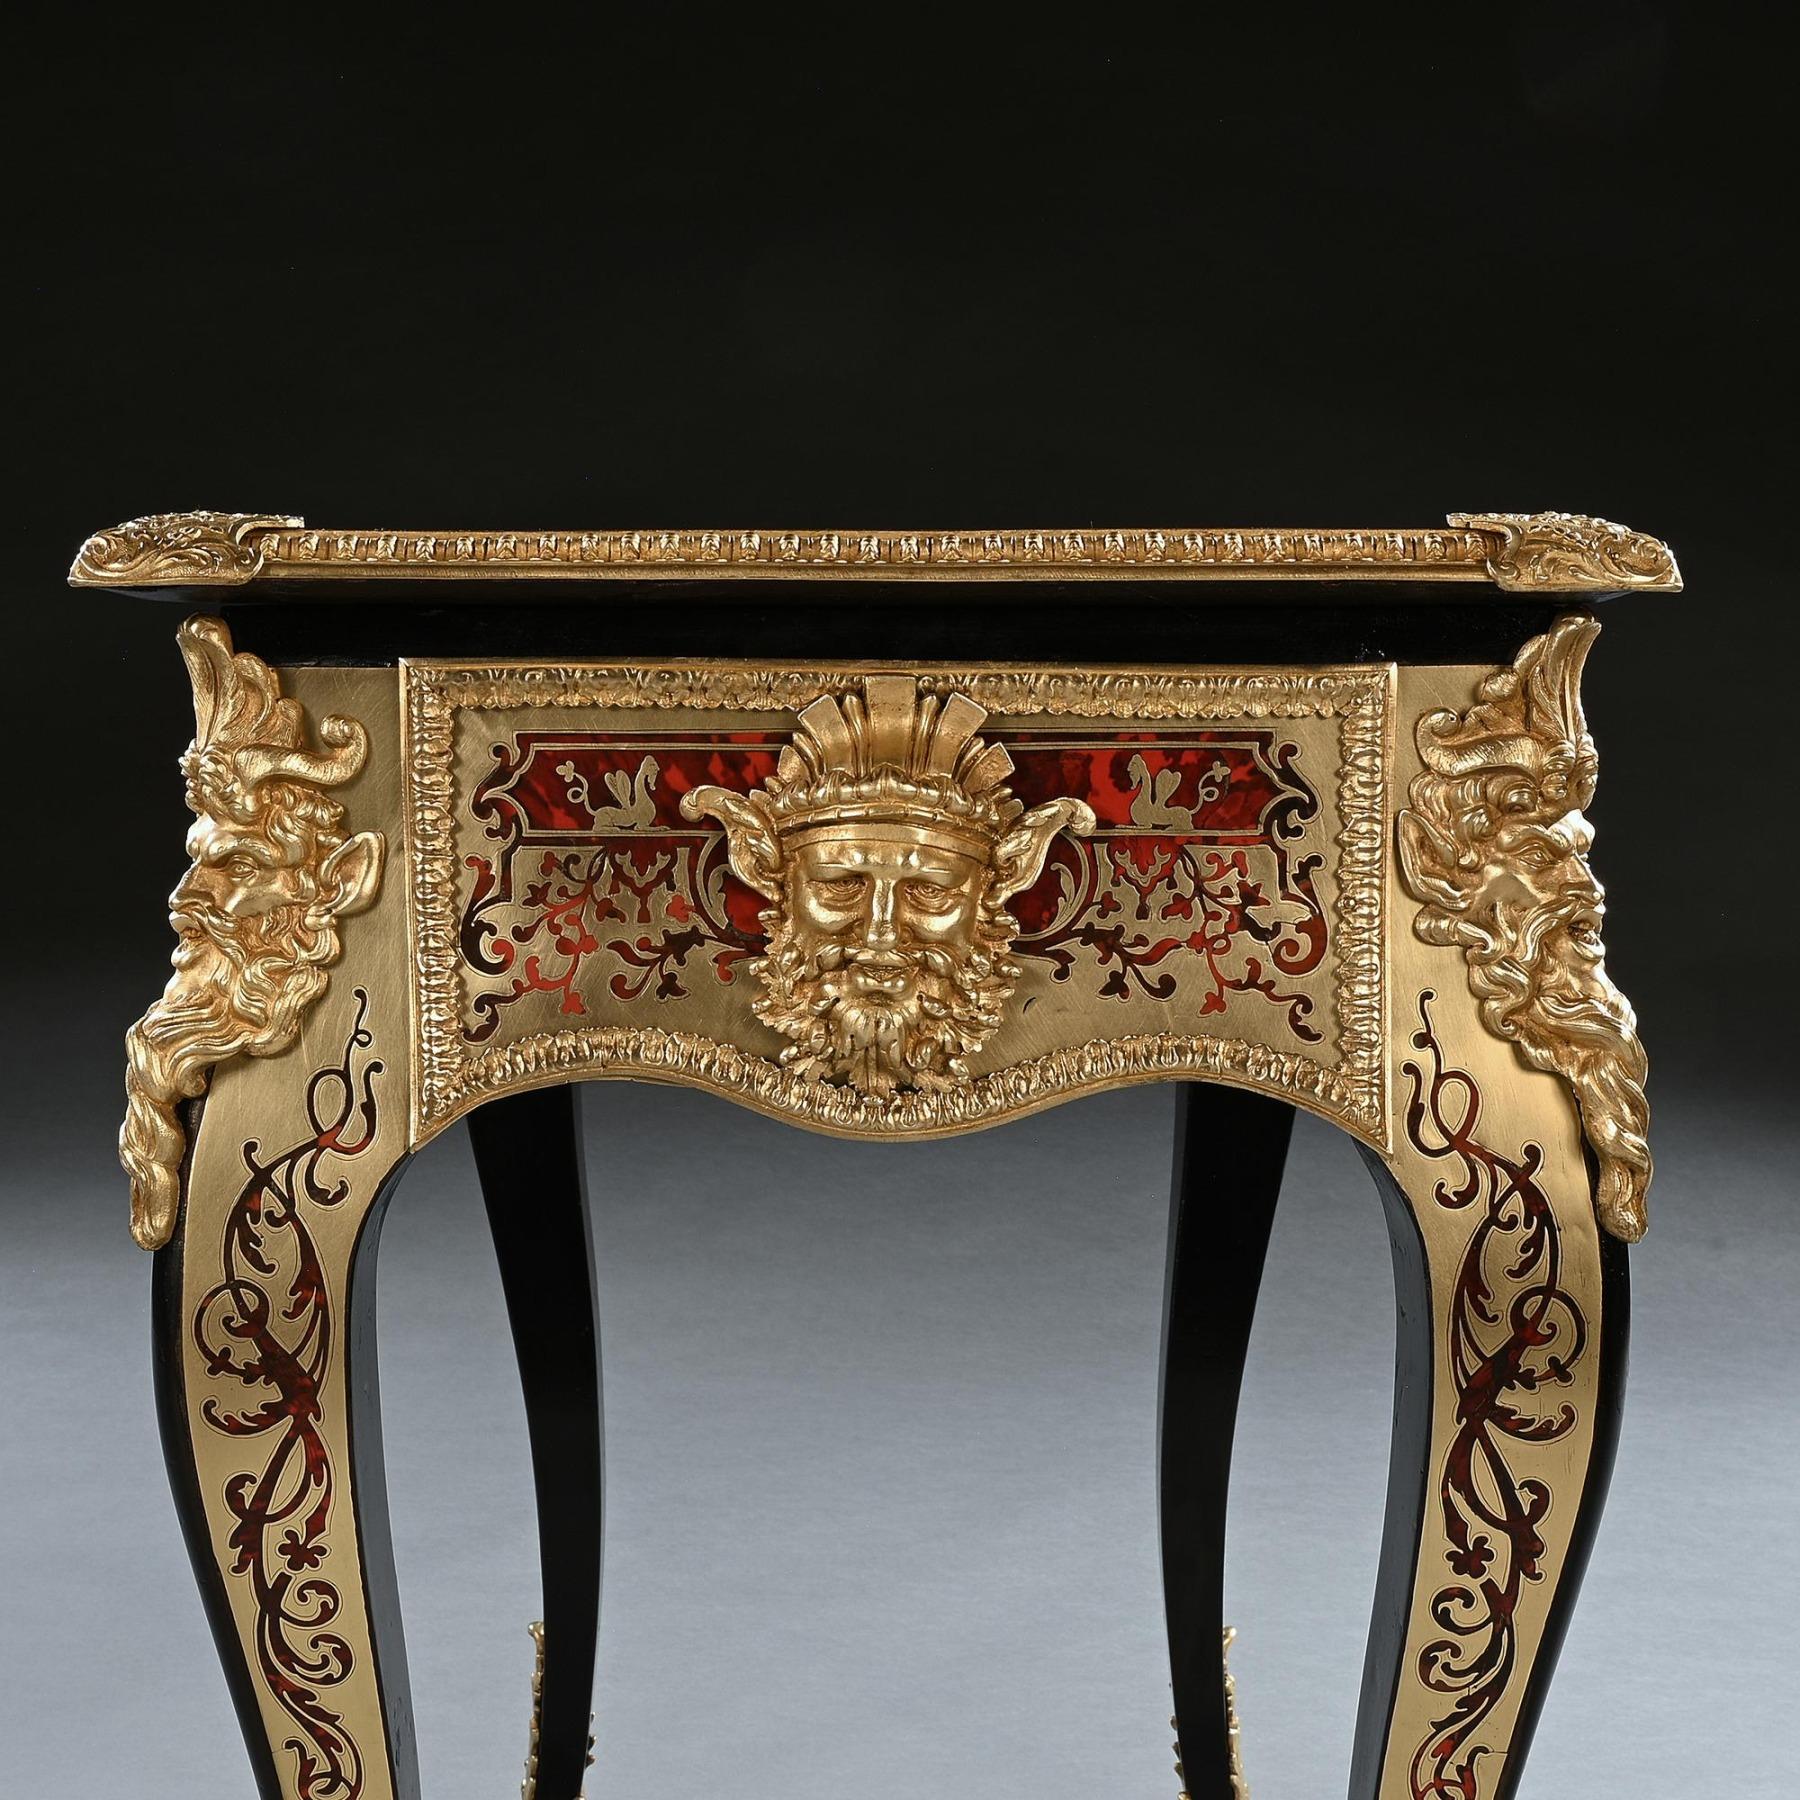 Ormolu An Exceptional George Iv Period Boulle Games Table Attributed to Thomas Parker For Sale